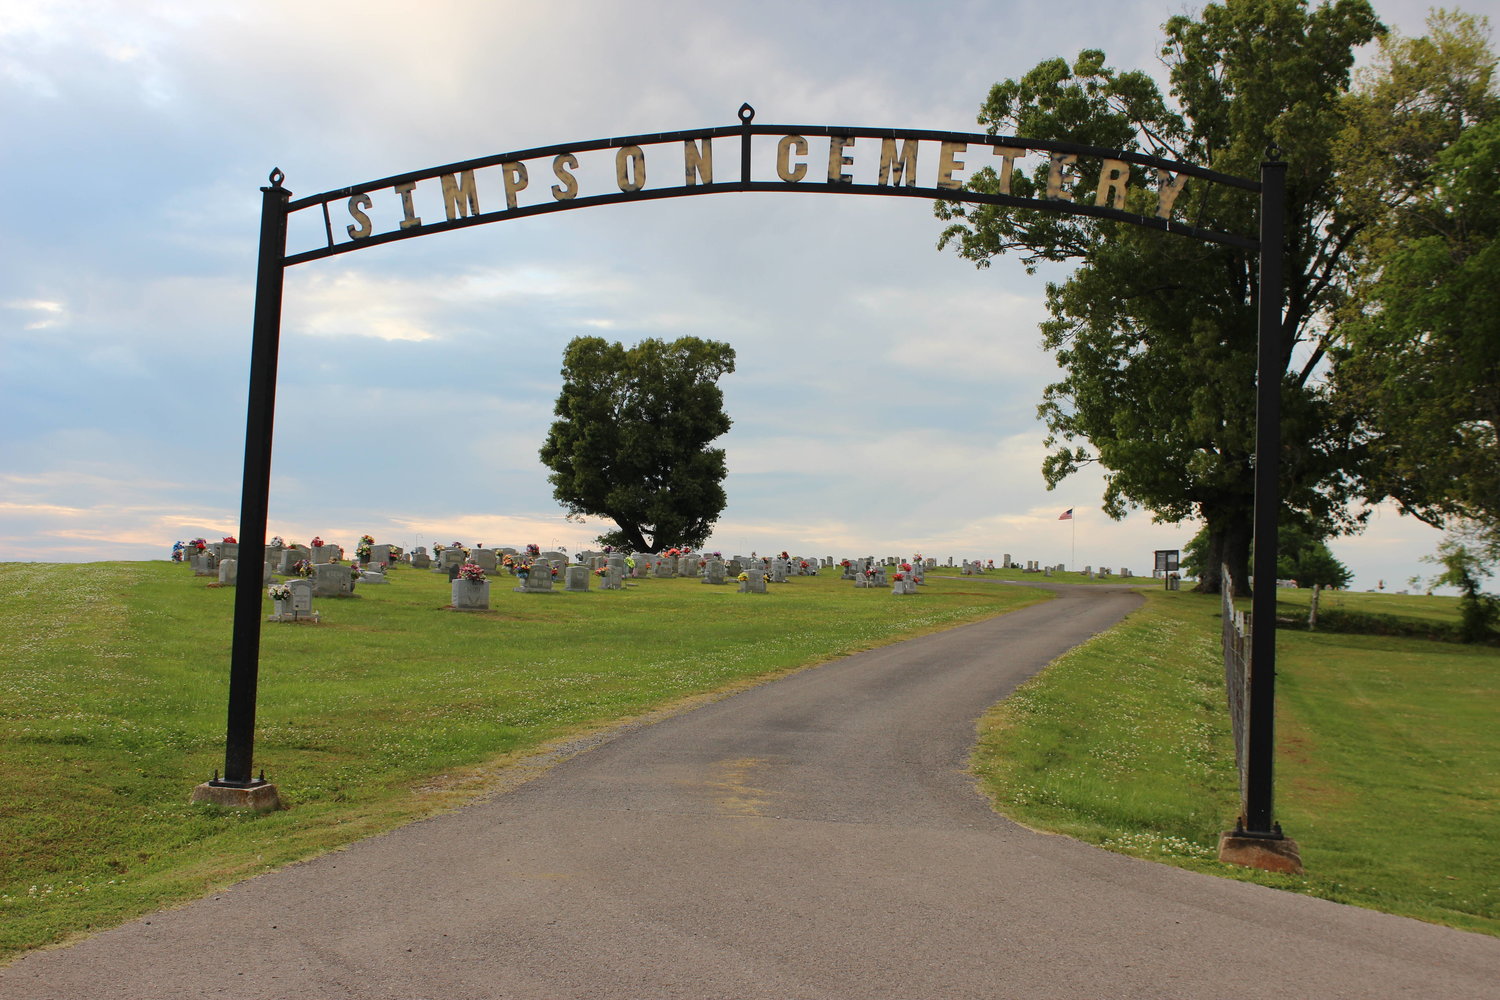 Simpson Cemetery is historic in nature and provides a picturesque backdrop for the Rover community.